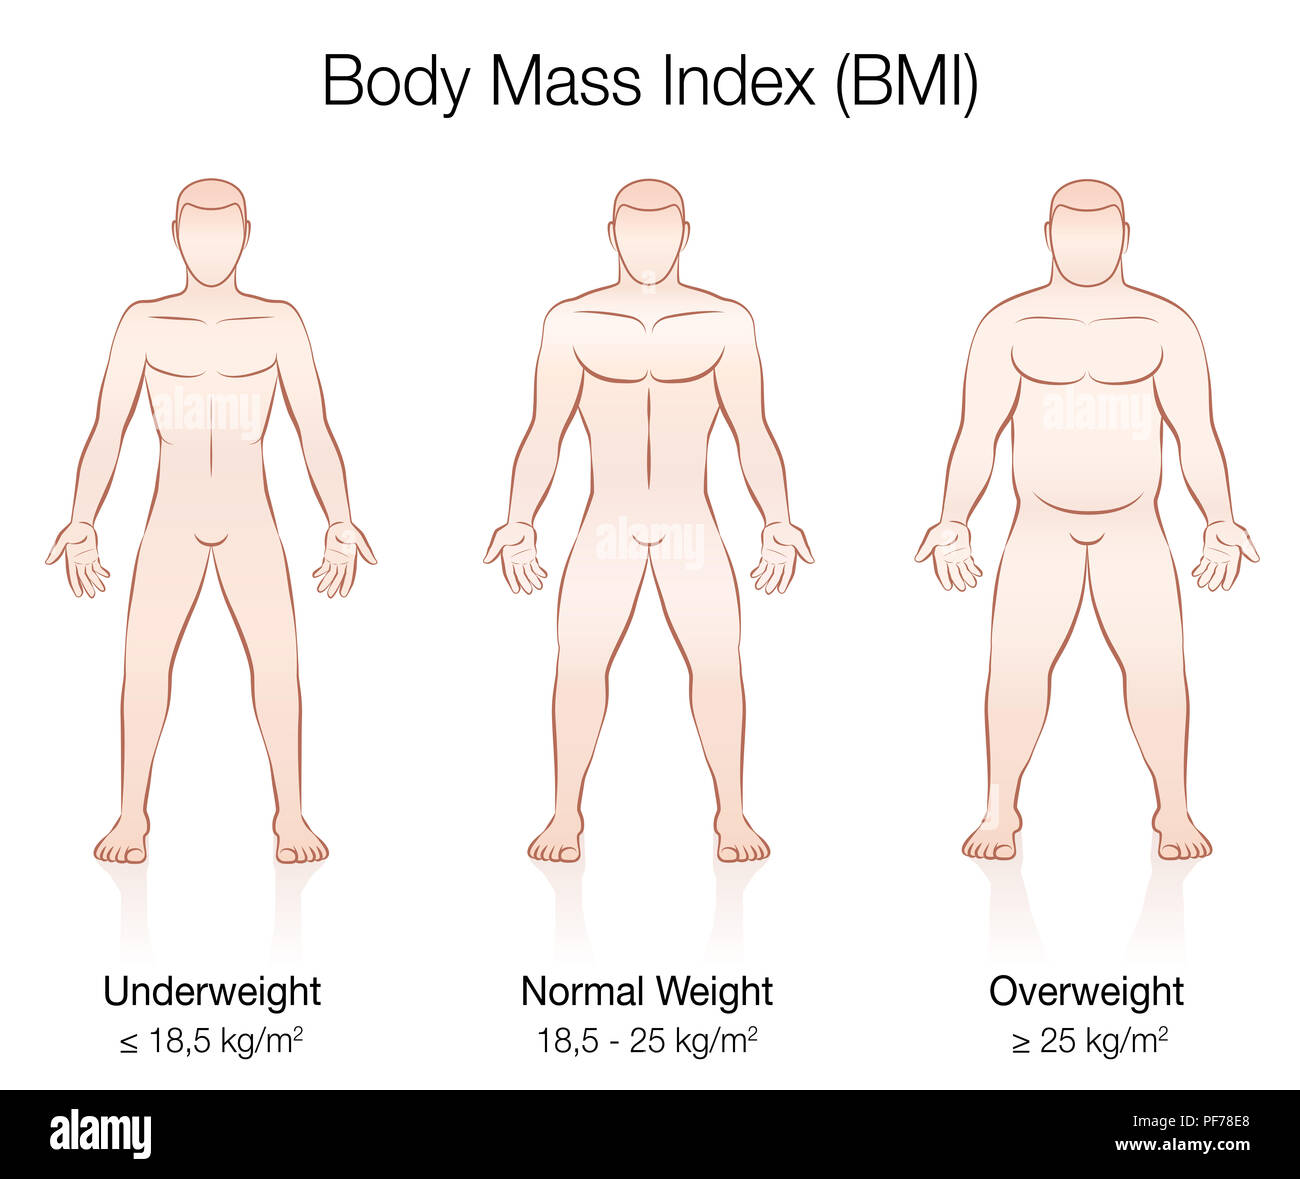 Body Mass Index BMI. Underweight, normal weight and overweight male body - illustration of three men with different anatomy. Stock Photo